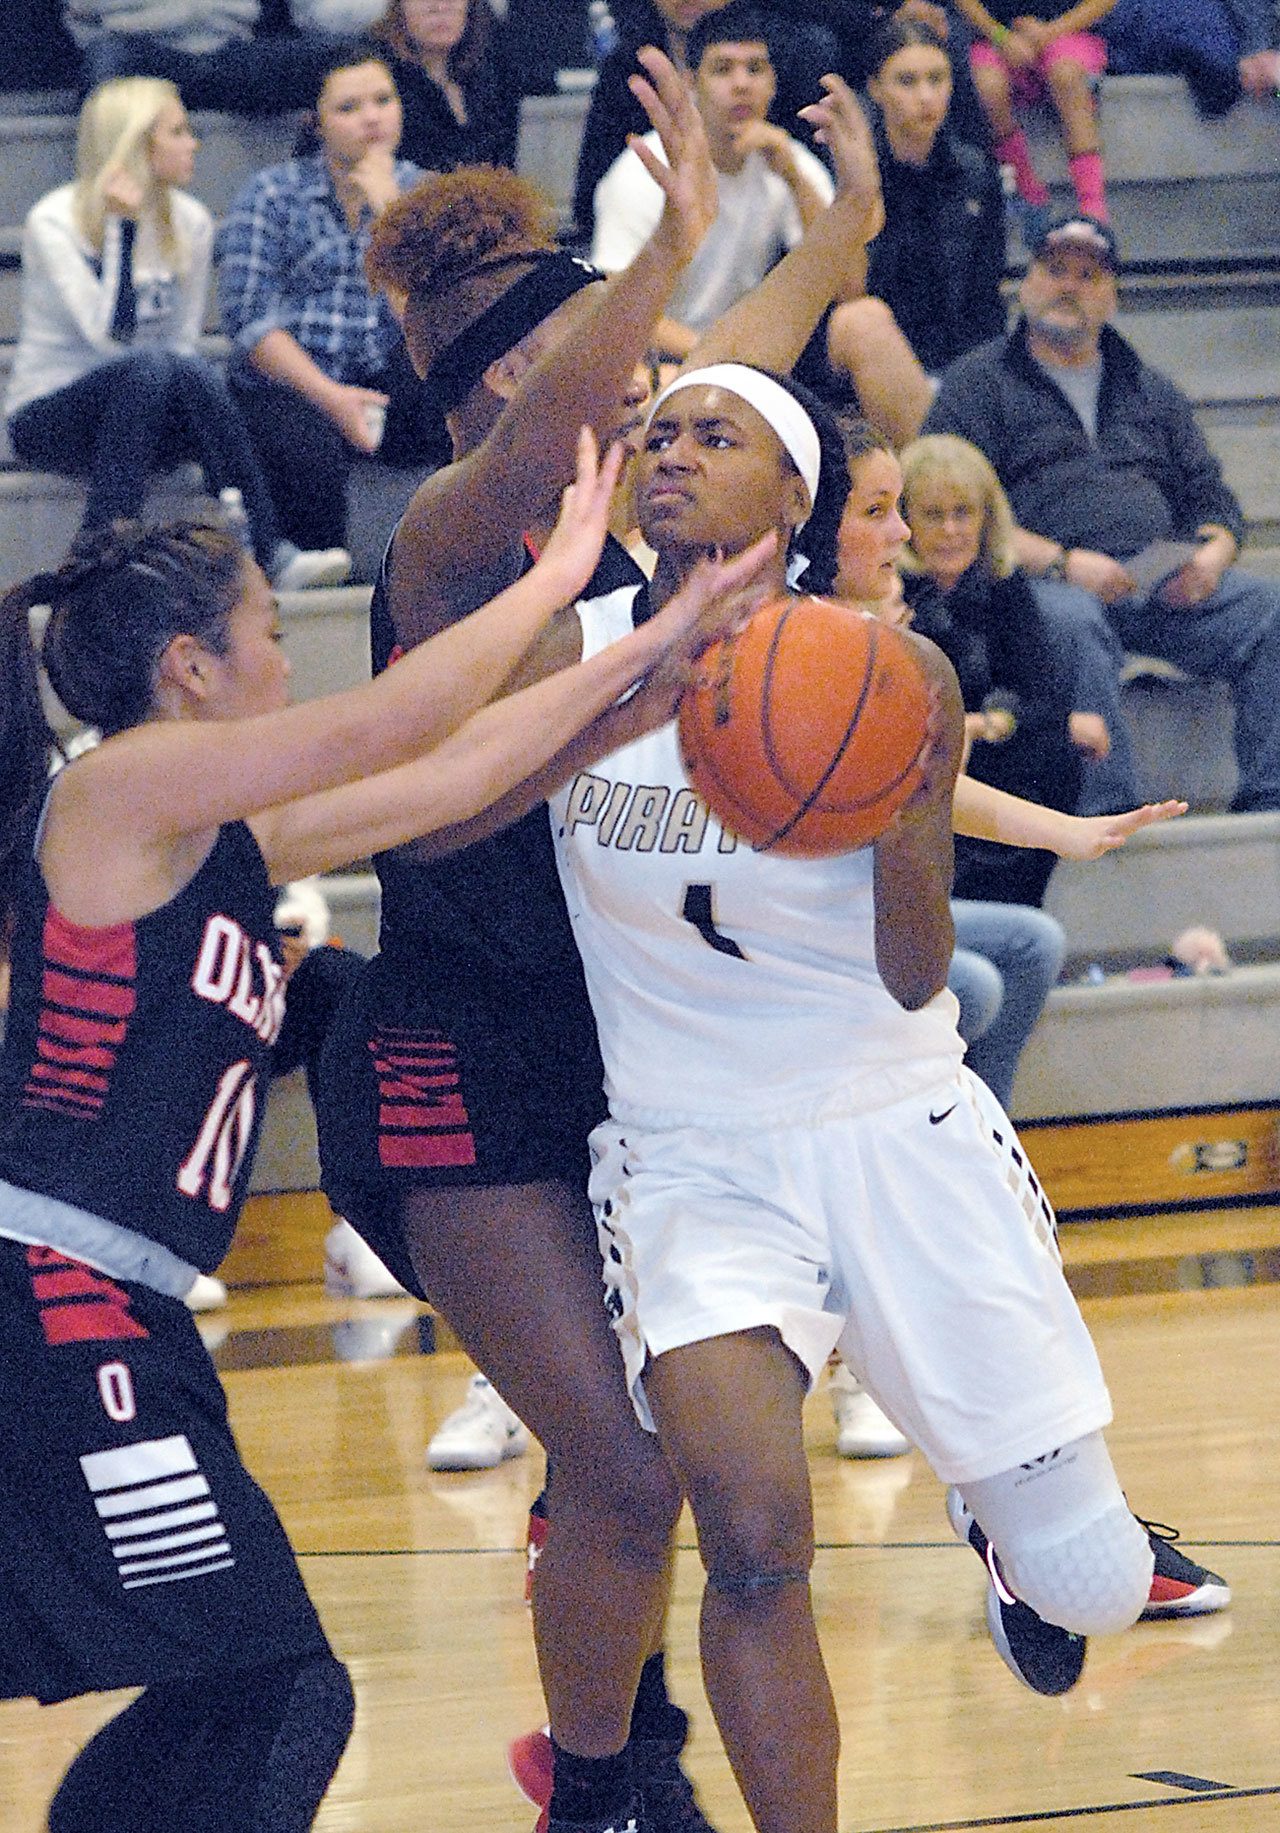 Keith Thorpe/Peninsula Daily News Peninsula’s Anaya Rodisha, right, drives to the lane past the defense of Olympic’s Libby Borogonia, left. and Zyriana Davies in the foruth quarter on Wednesday in Port Angeles.